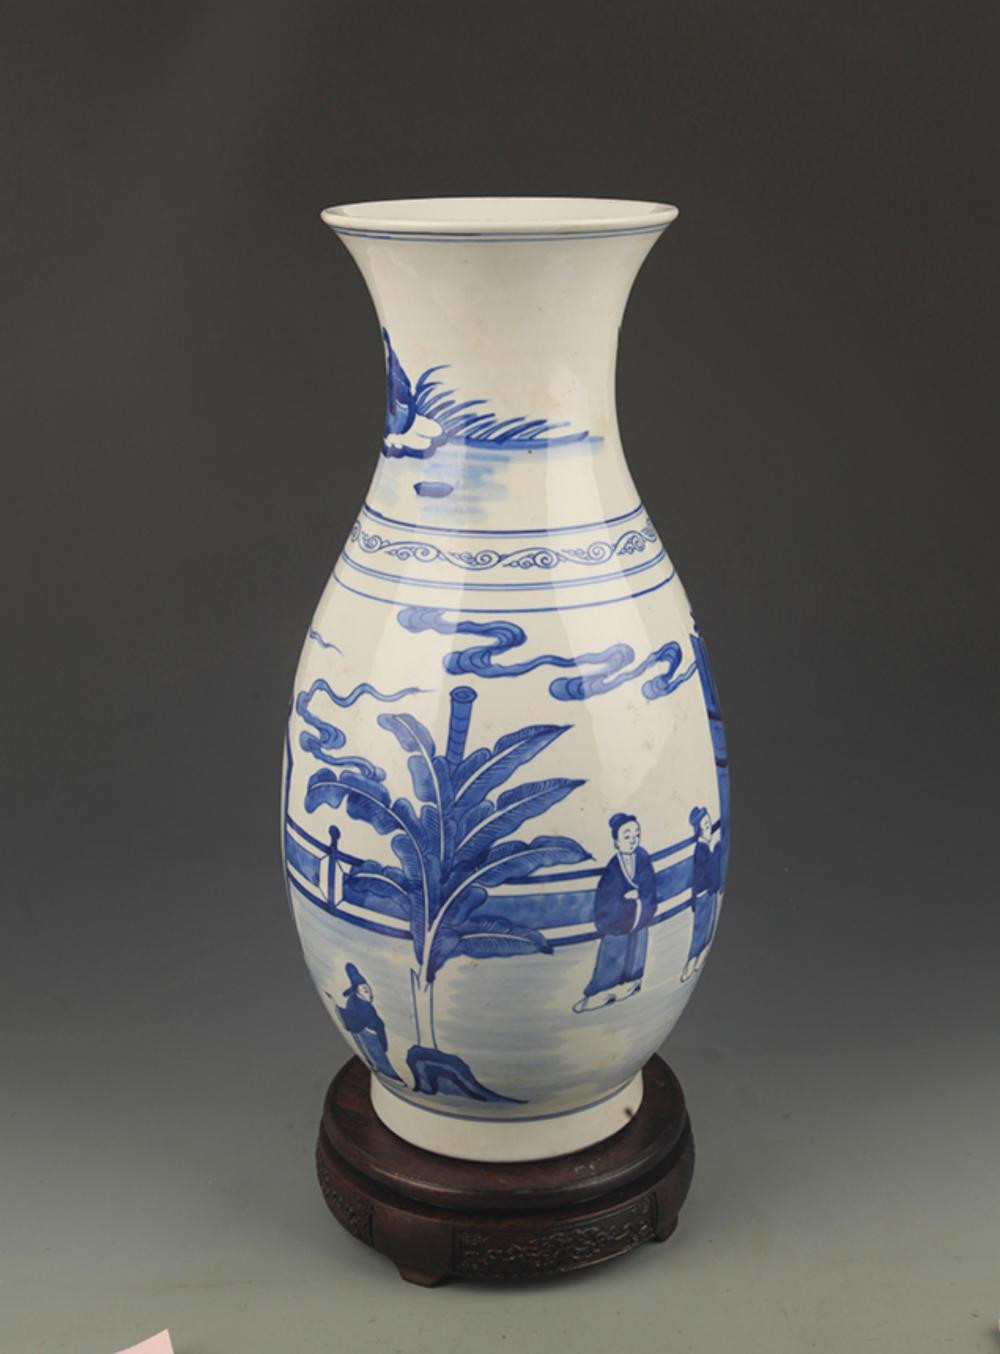 16 Famous Blue and White Porcelain Vases for Sale 2024 free download blue and white porcelain vases for sale of chinese art antiques for sale at online auction modern antique with blue and white character pattern porcelain vase